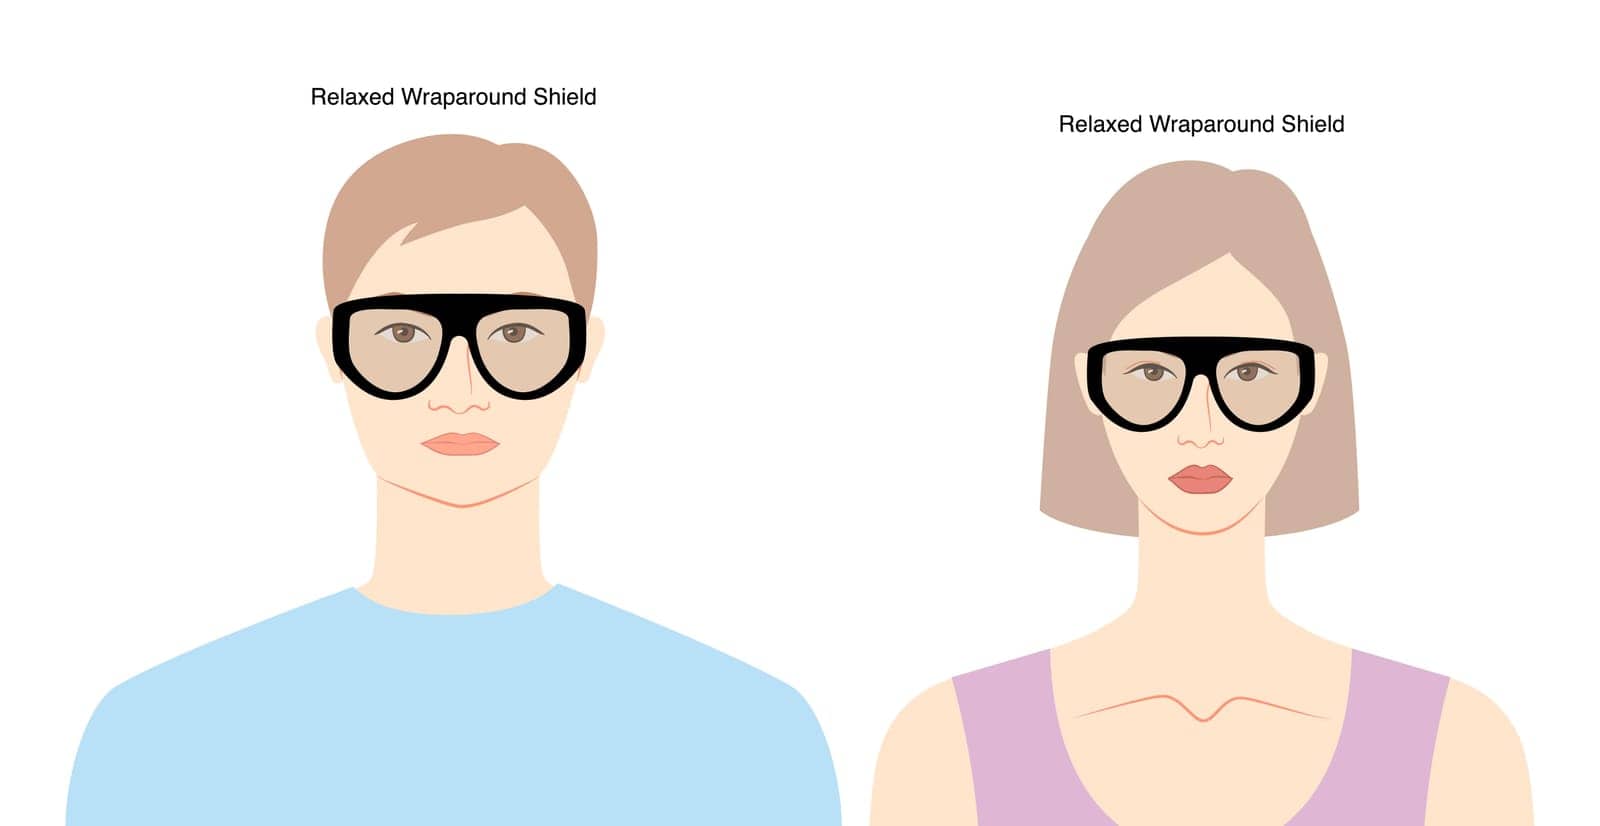 Relaxed Wraparound Shield frame glasses on women and men flat character fashion accessory illustration. Sunglass silhouette style, spectacles eyeglasses, lens sketch style outline isolated on white